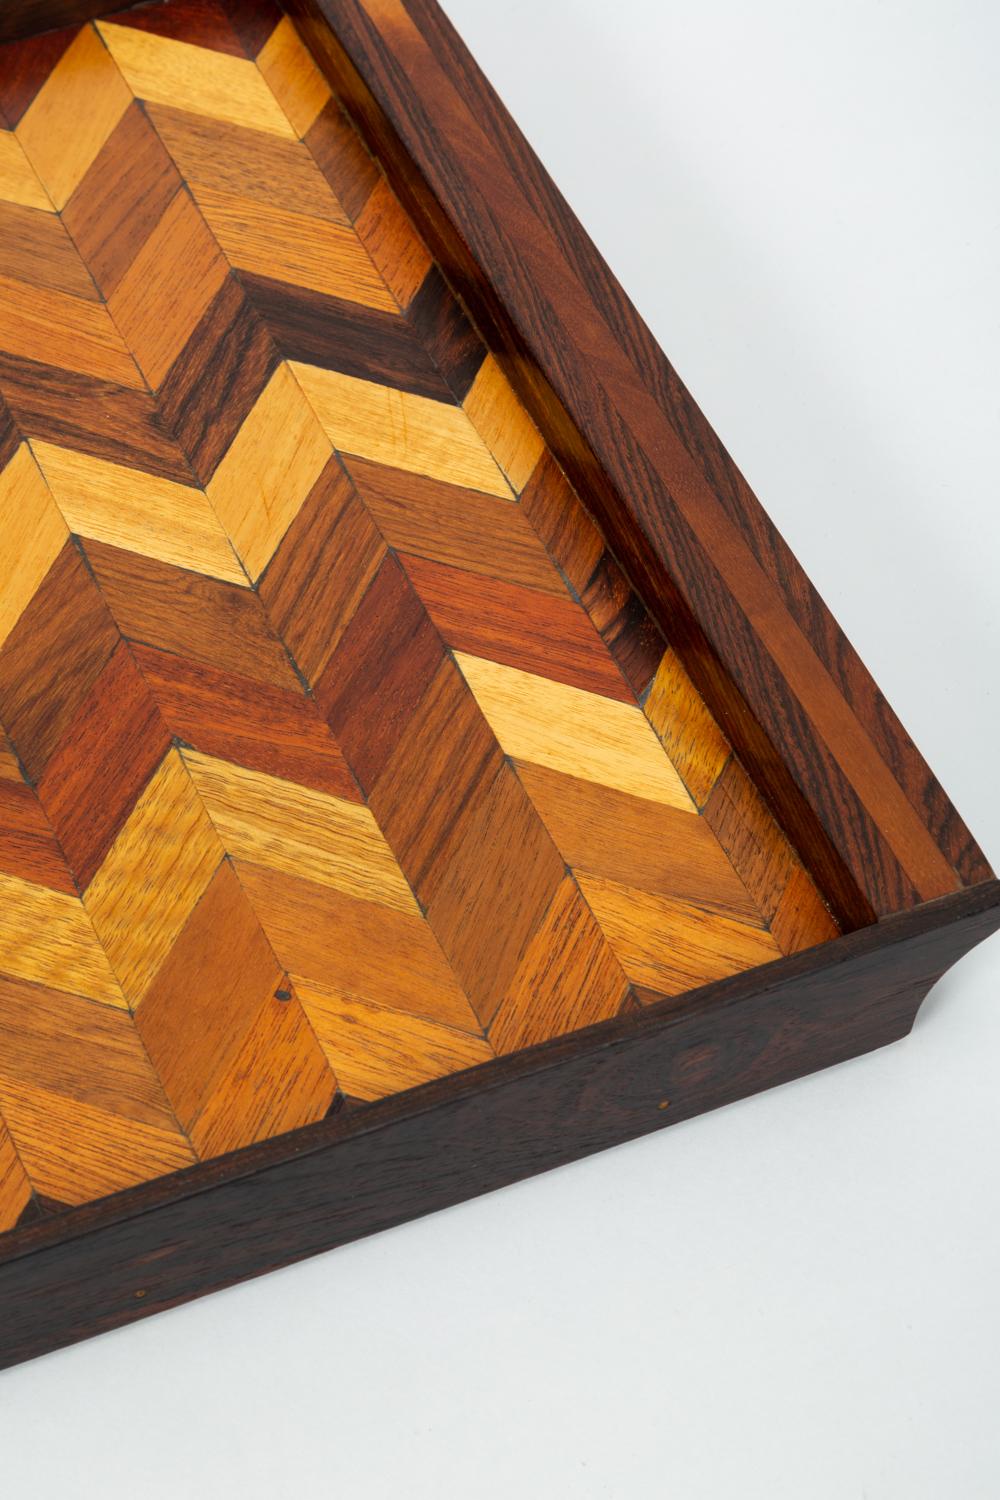 Inlaid Tray with Chevron Pattern by Don Shoemaker for Senal 1